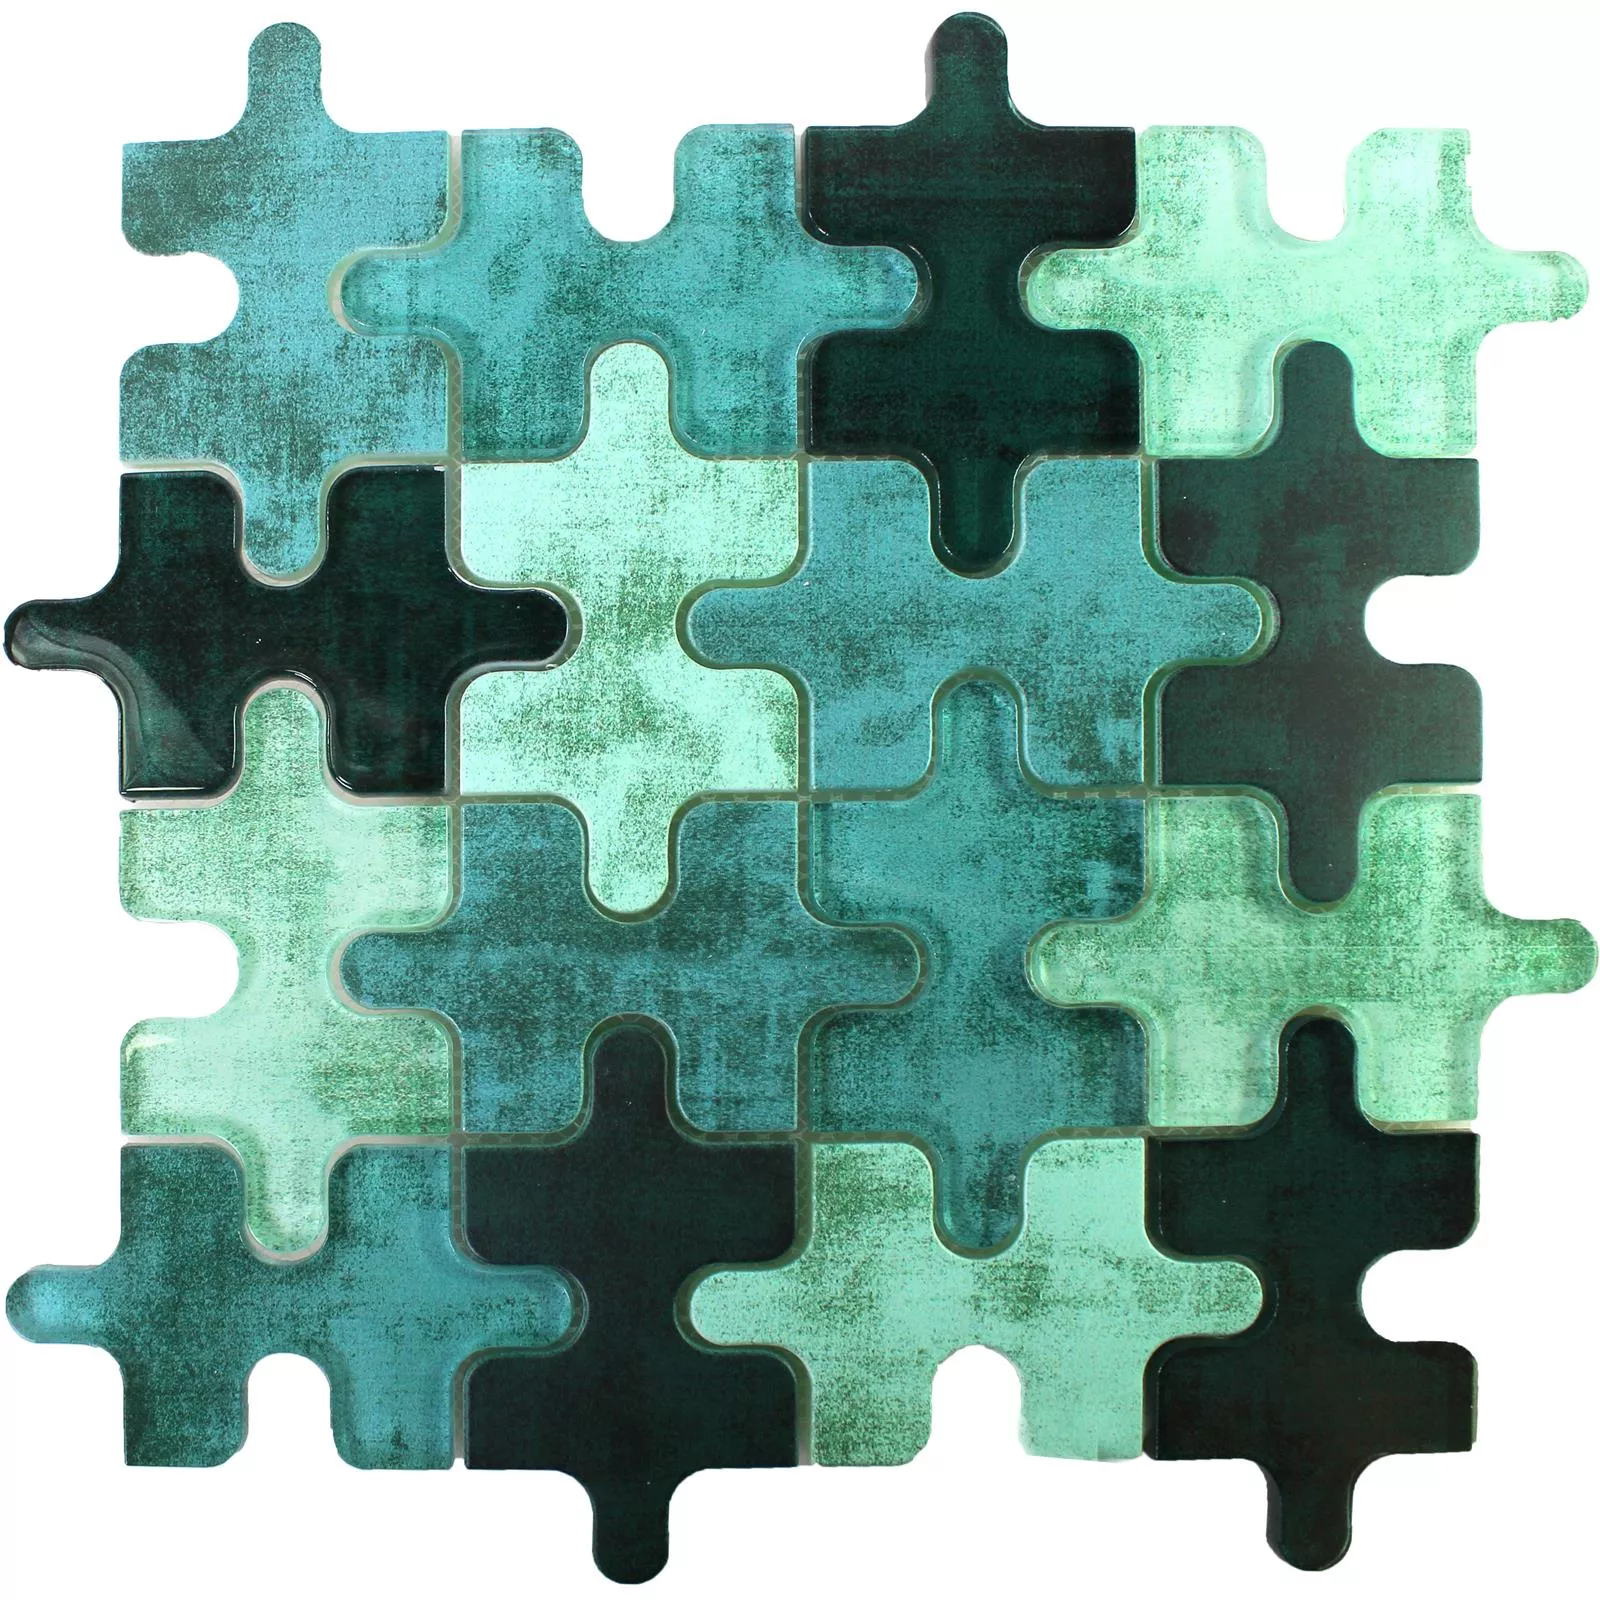 Glass Mosaic Tiles Puzzle Green